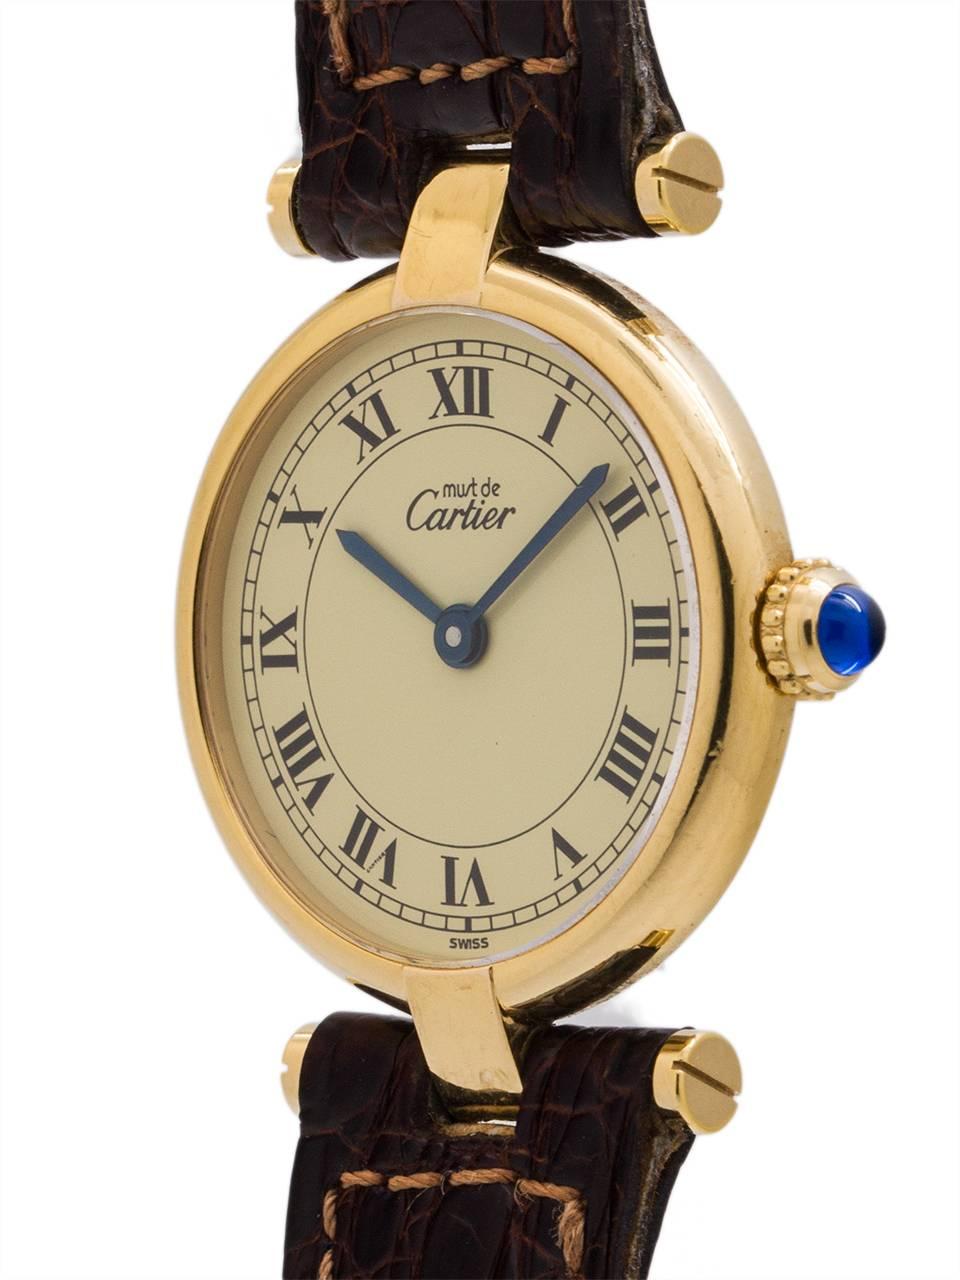 
Cartier Man’s Vermeil Vendome Tank Wristwatch circa 1990s. Case measuring 30.5 x 37mm with T-bar lugs. Featuring cream dial with classic printed Cartier Roman numbers with blued steel hands and blue sapphire cabochon crown. Battery powered quartz